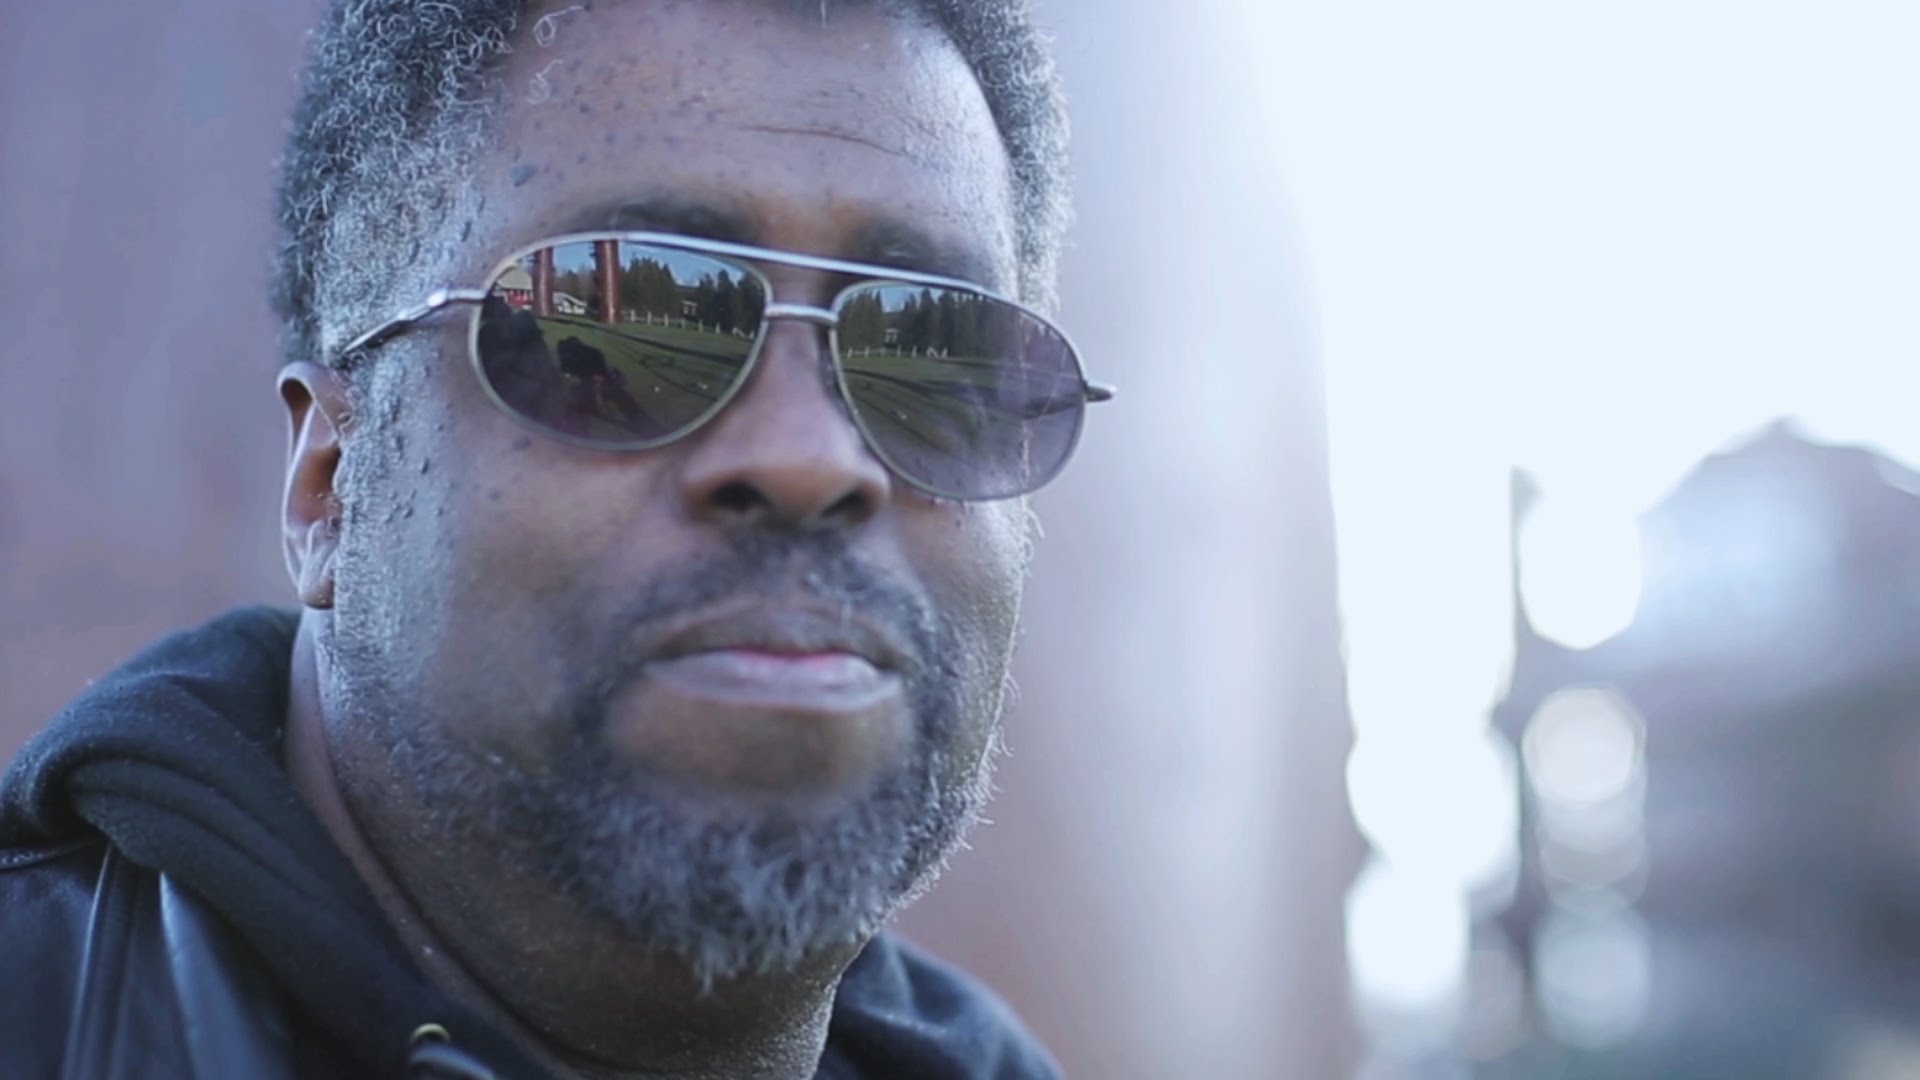 Image for "It's bad out there but you can handle it, if you're badass enough," says Mike Pondsmith